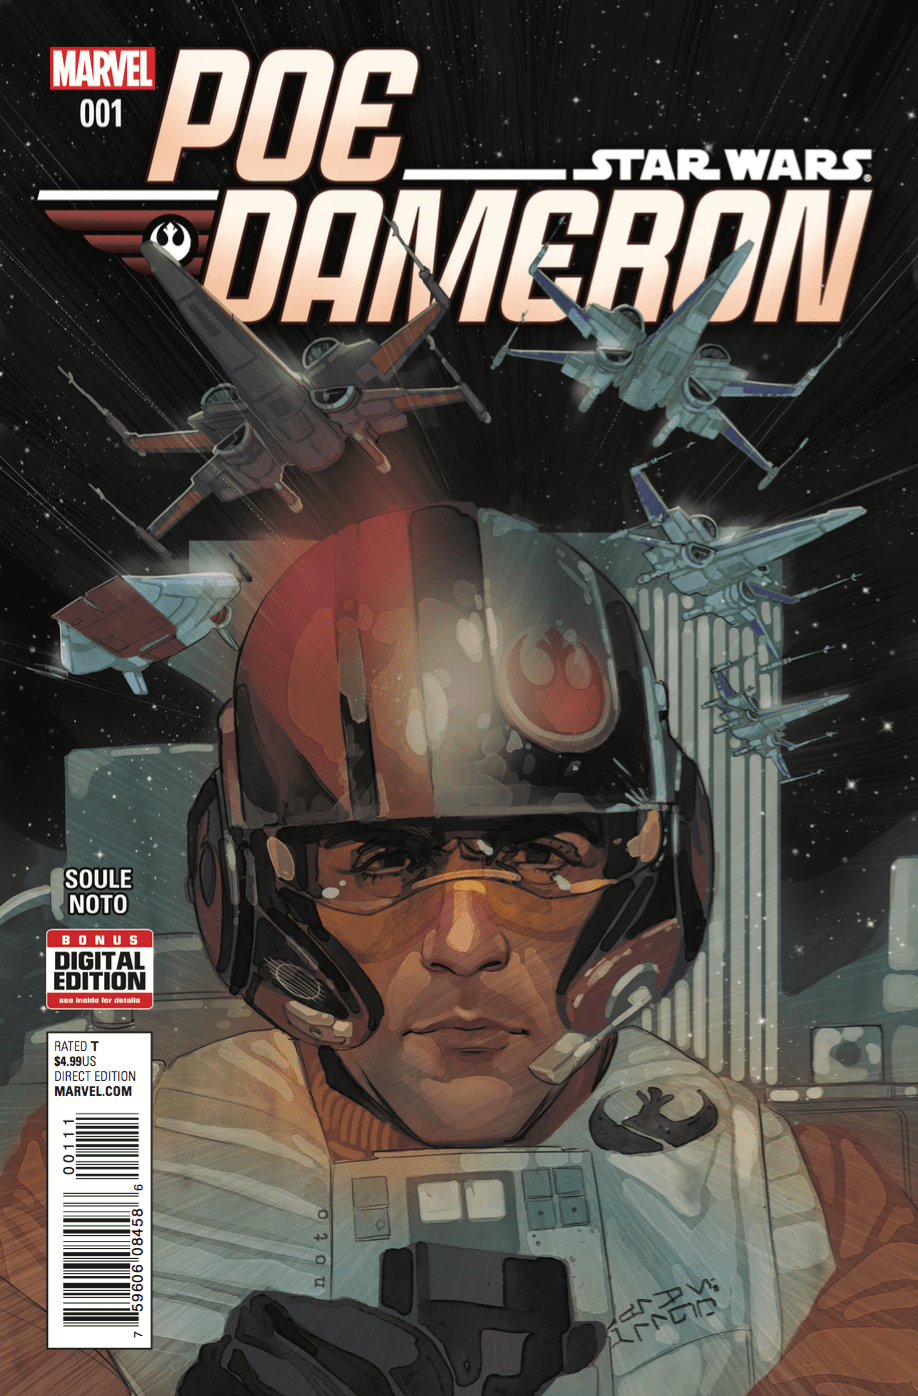 This Week’s New Poe Dameron Comic Expands The Star Wars Universe